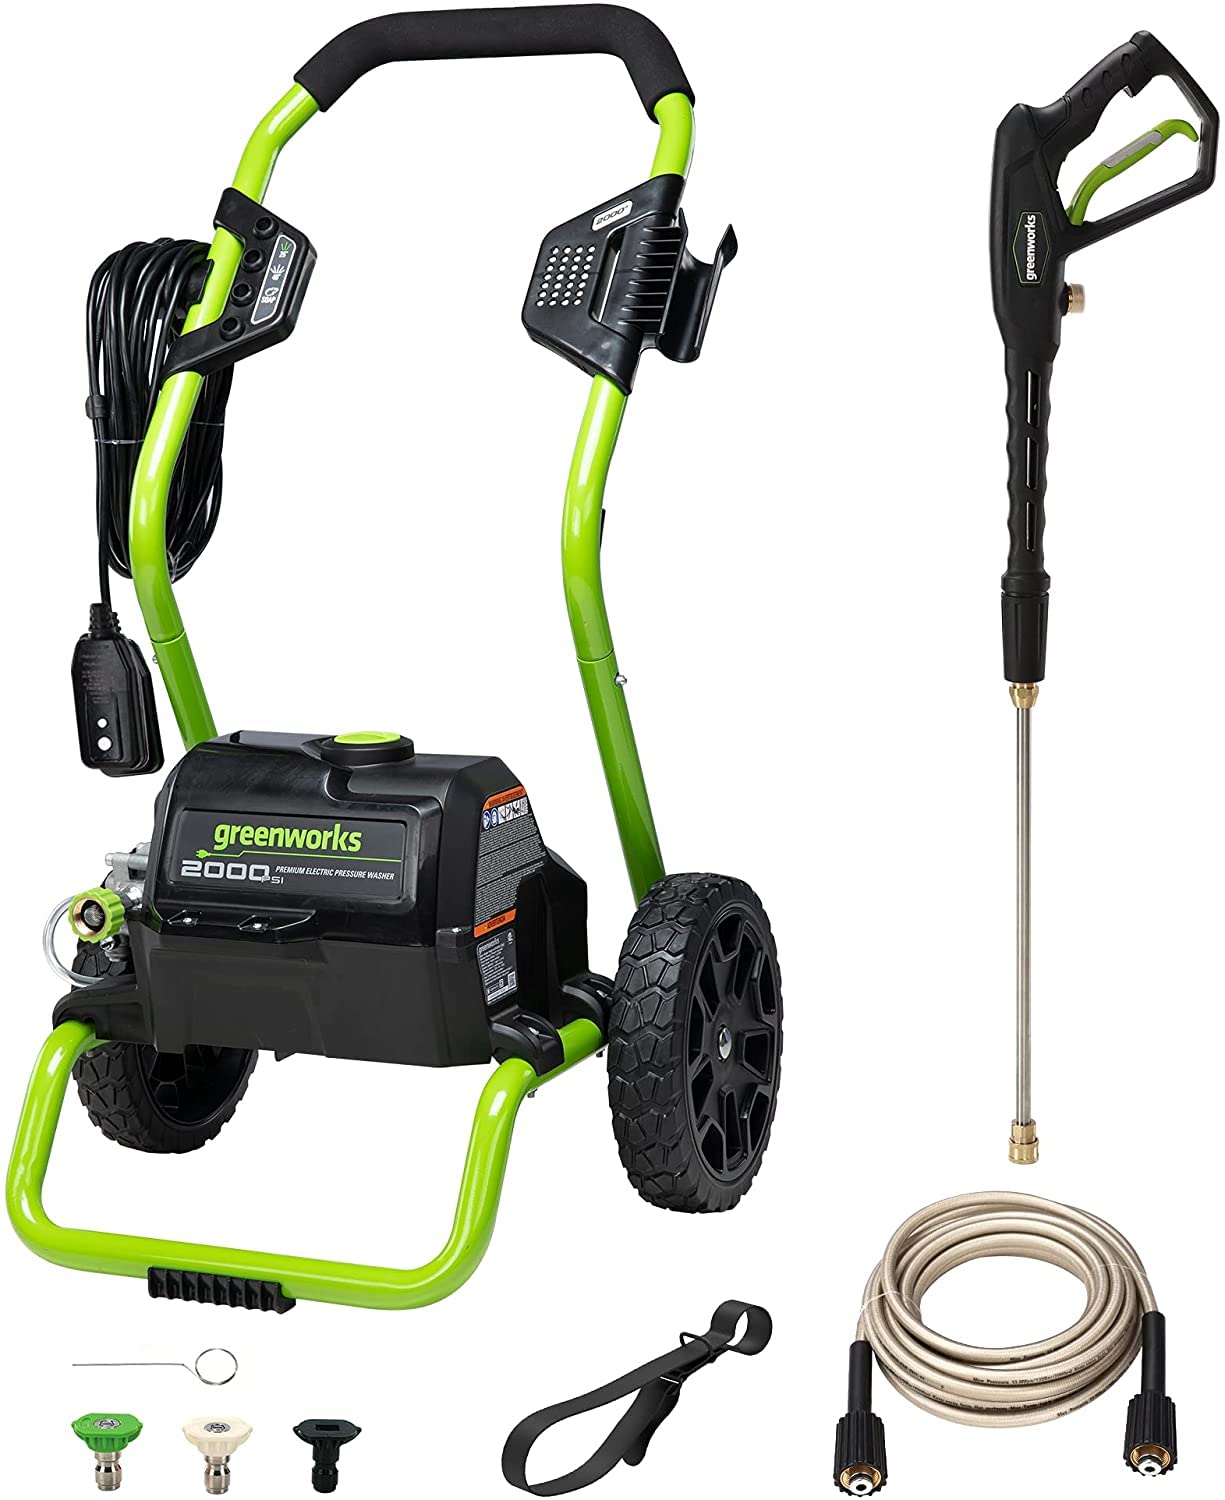 Greenworks 2000 PSI (13 Amp) Electric Pressure Washer (Wheels For Transport / 20 FT Hose / 35 FT Power Cord) Great For Cars, Fen